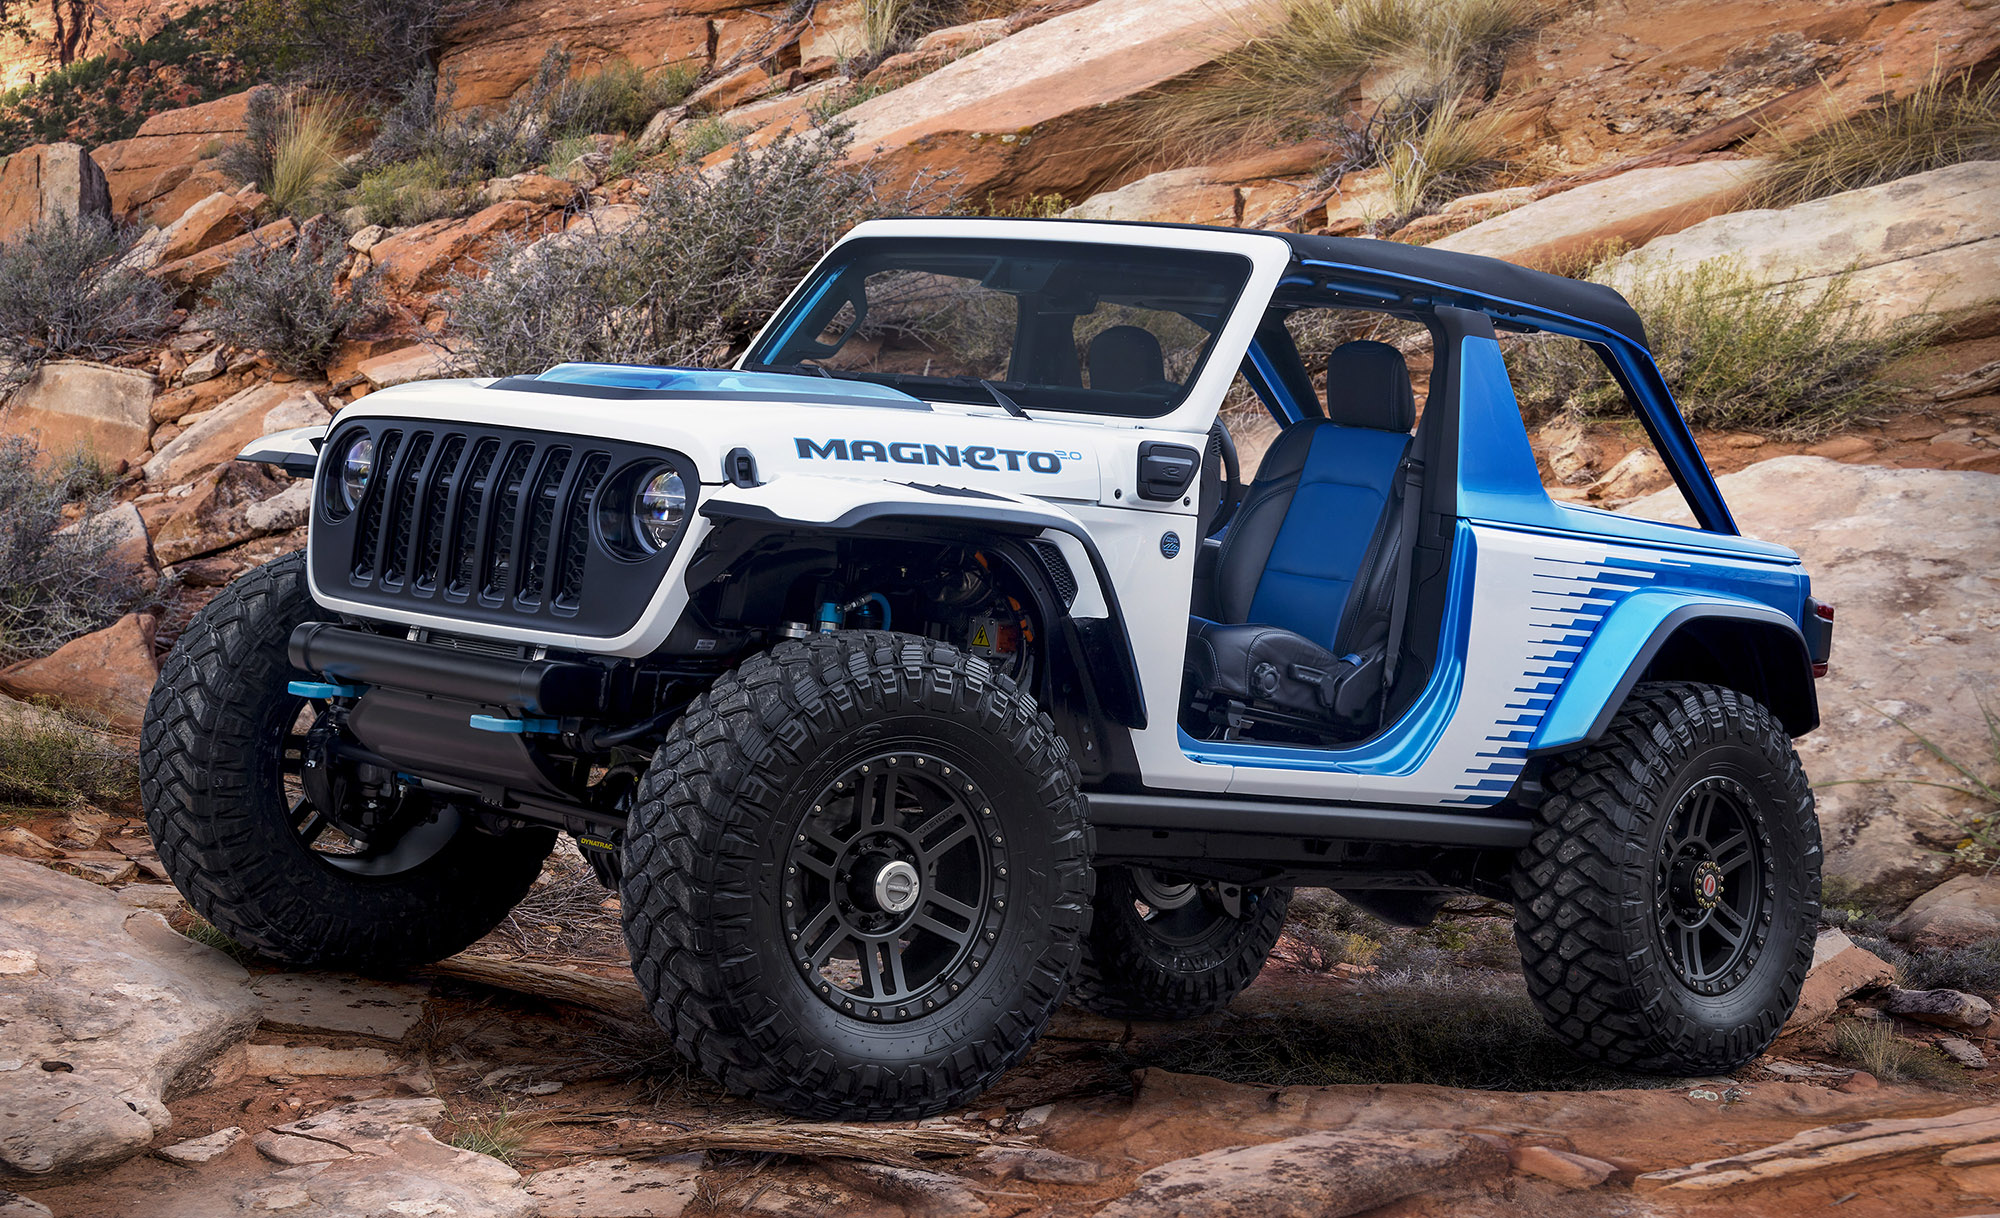 Jeep Funds Electric Future With a 16 MPG Gas-Power Behemoth - Bloomberg